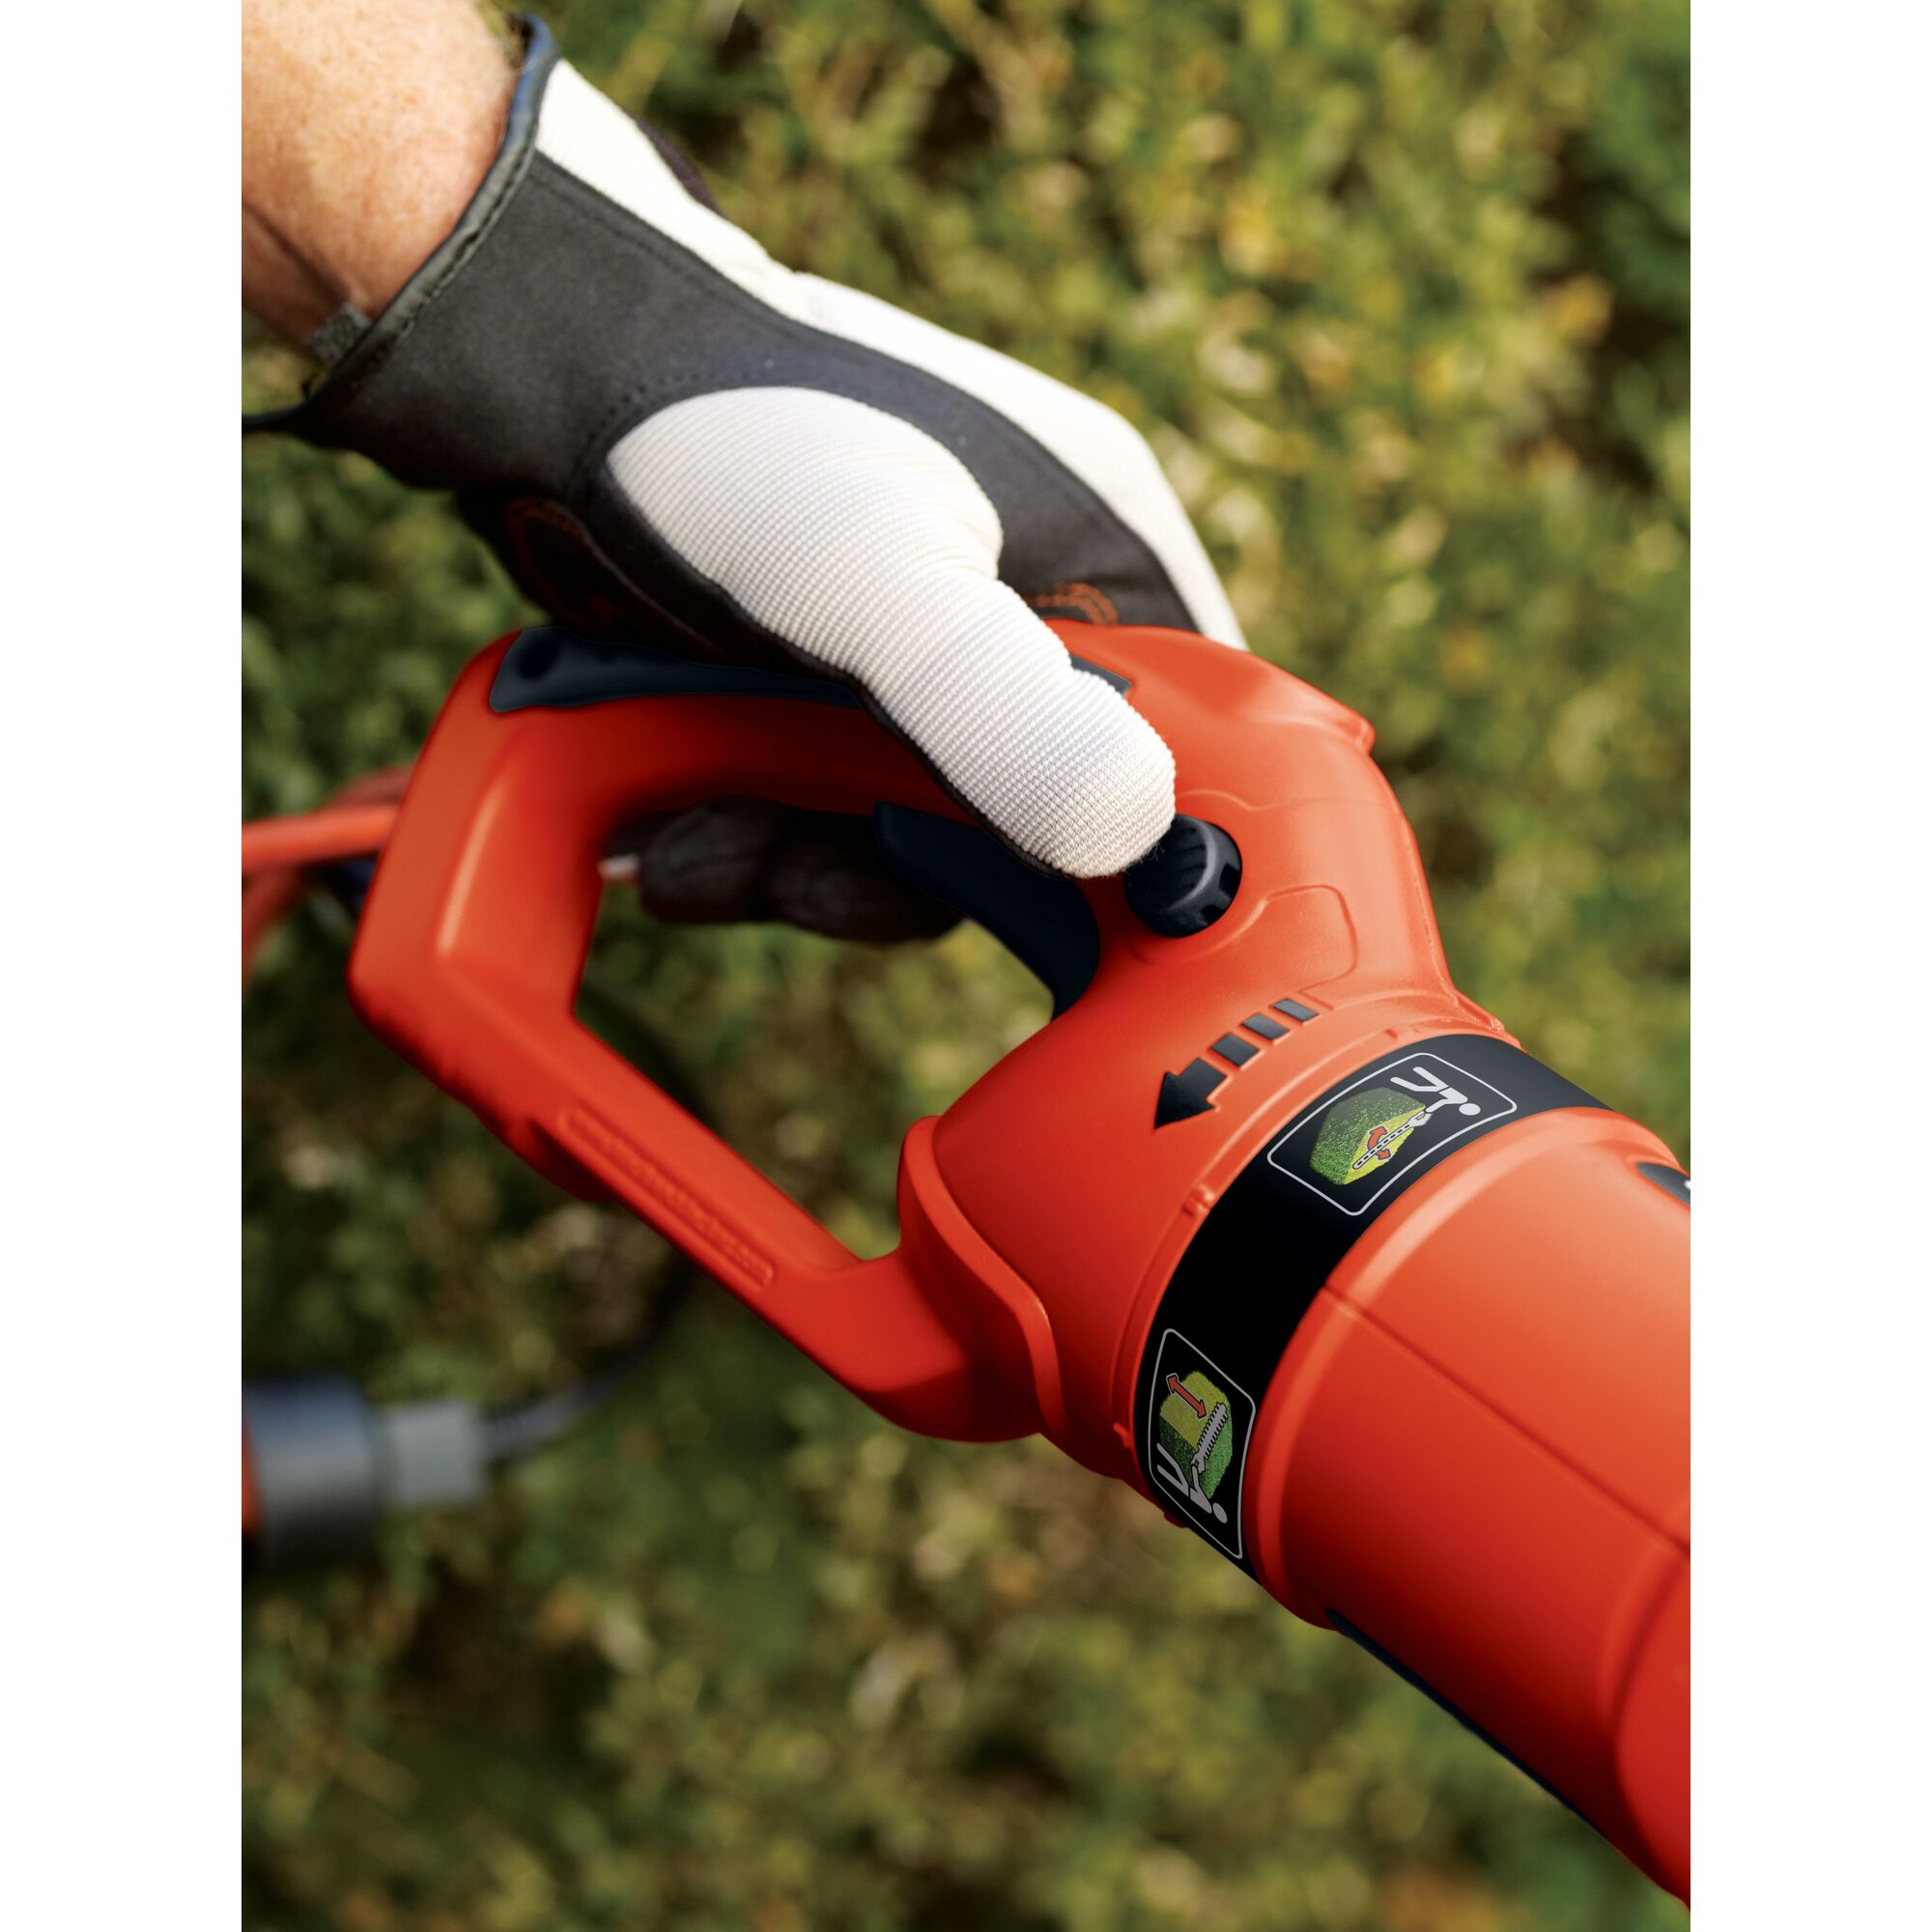 Lock button feature of 24 inch Hedge Trimmer with Rotating Handle.